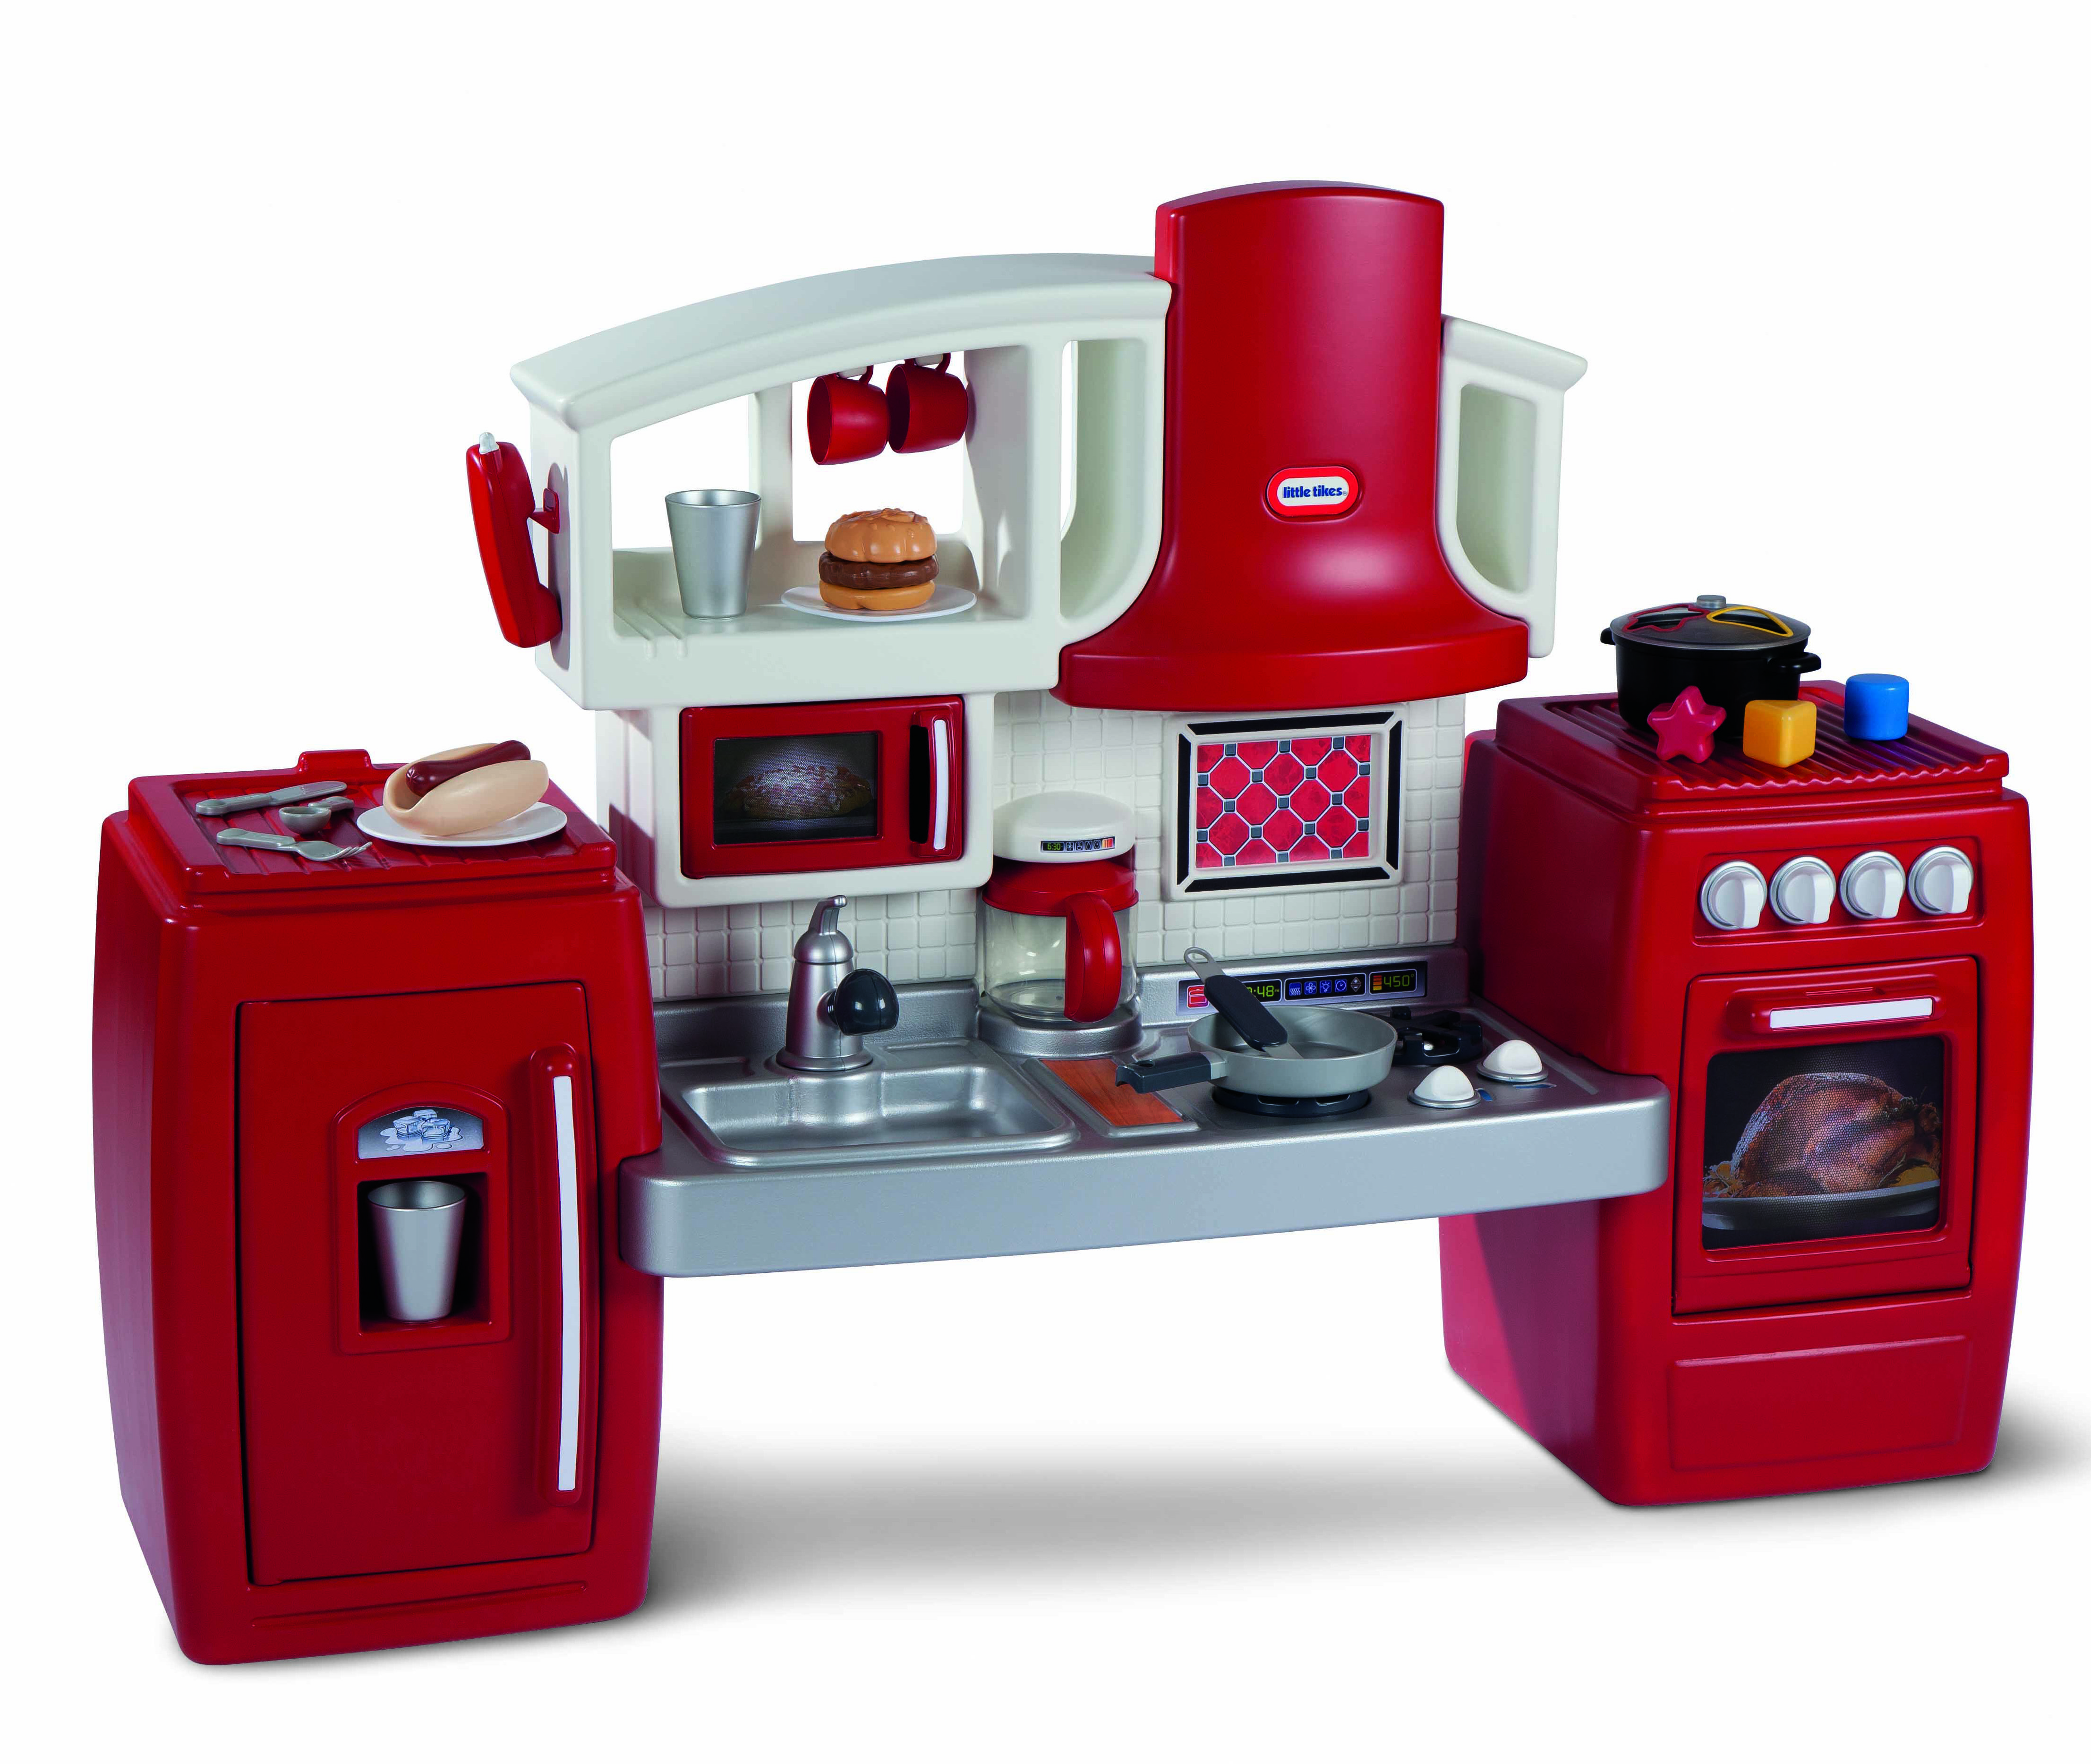 Mini Electric Princess Kitchen Toy Set With Refrigerator And